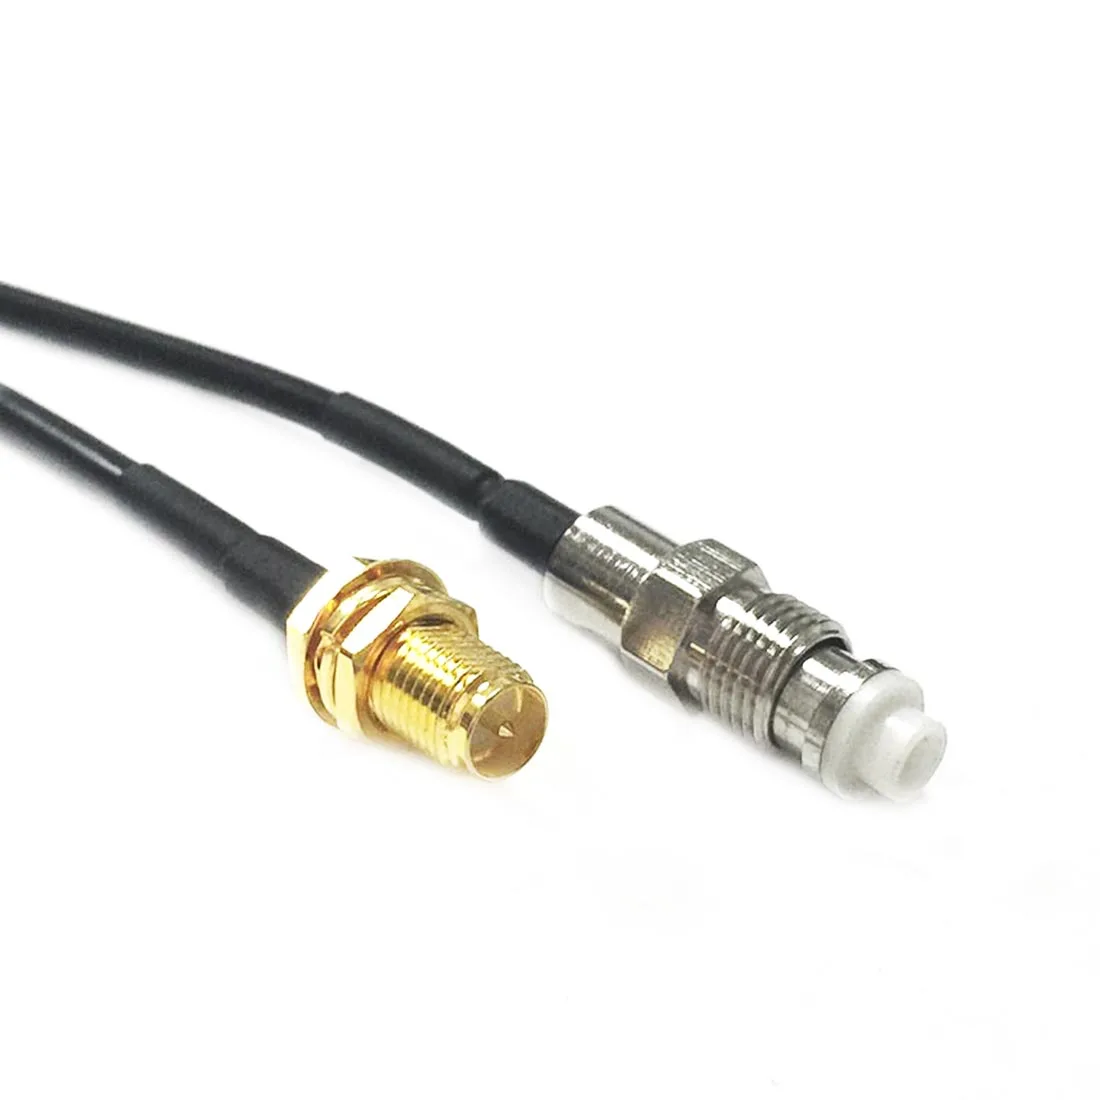 

Modem Coaxial Cable RP-SMA Female Jack Nut Switch FME Female Jack Connector RG174 Cable New Pigtail 20CM 8in Adapter